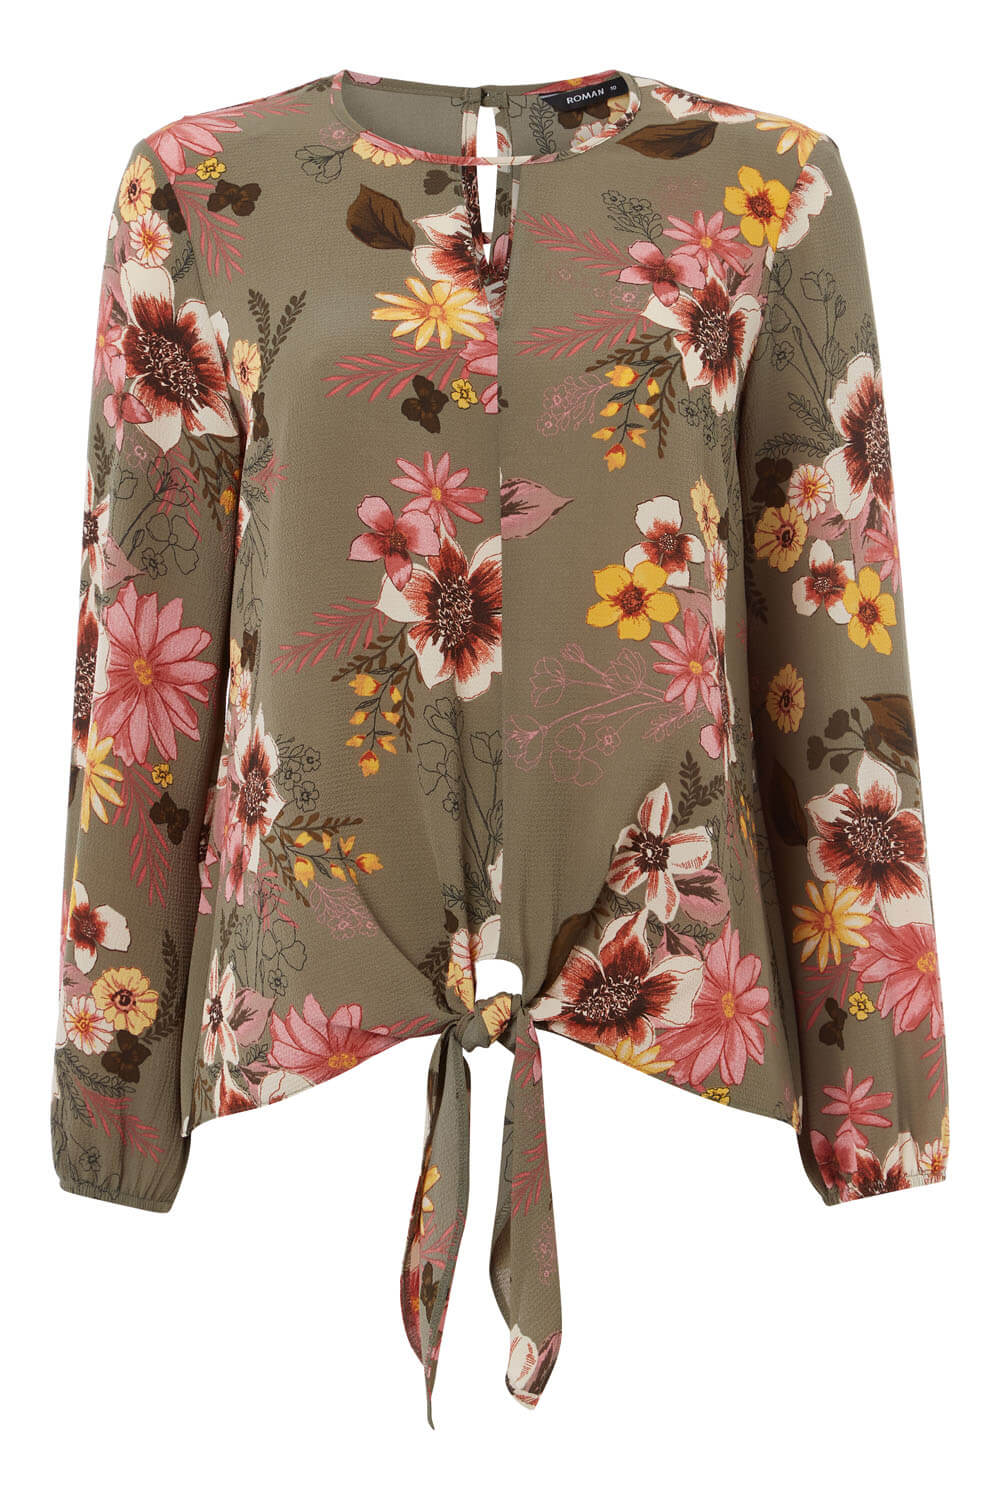 KHAKI Floral Tie Front Top, Image 4 of 8